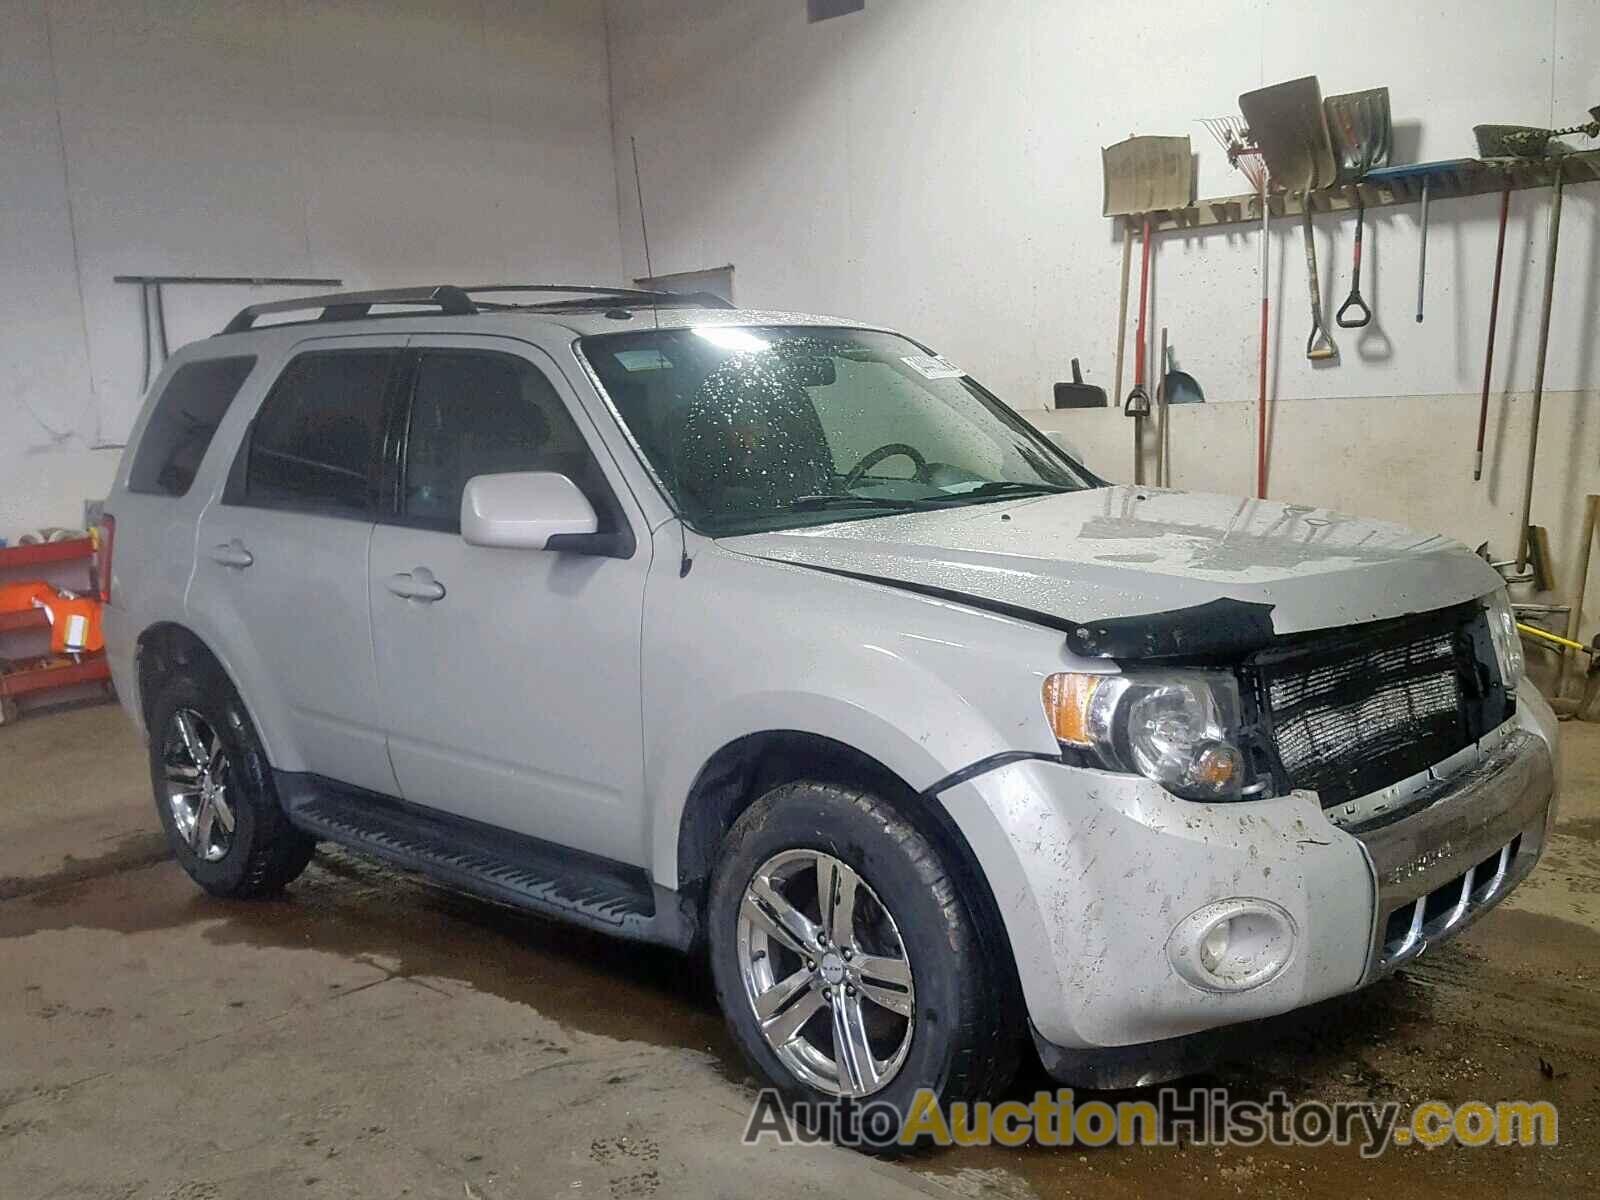 2009 FORD ESCAPE LIMITED, 1FMCU94G69KC40289